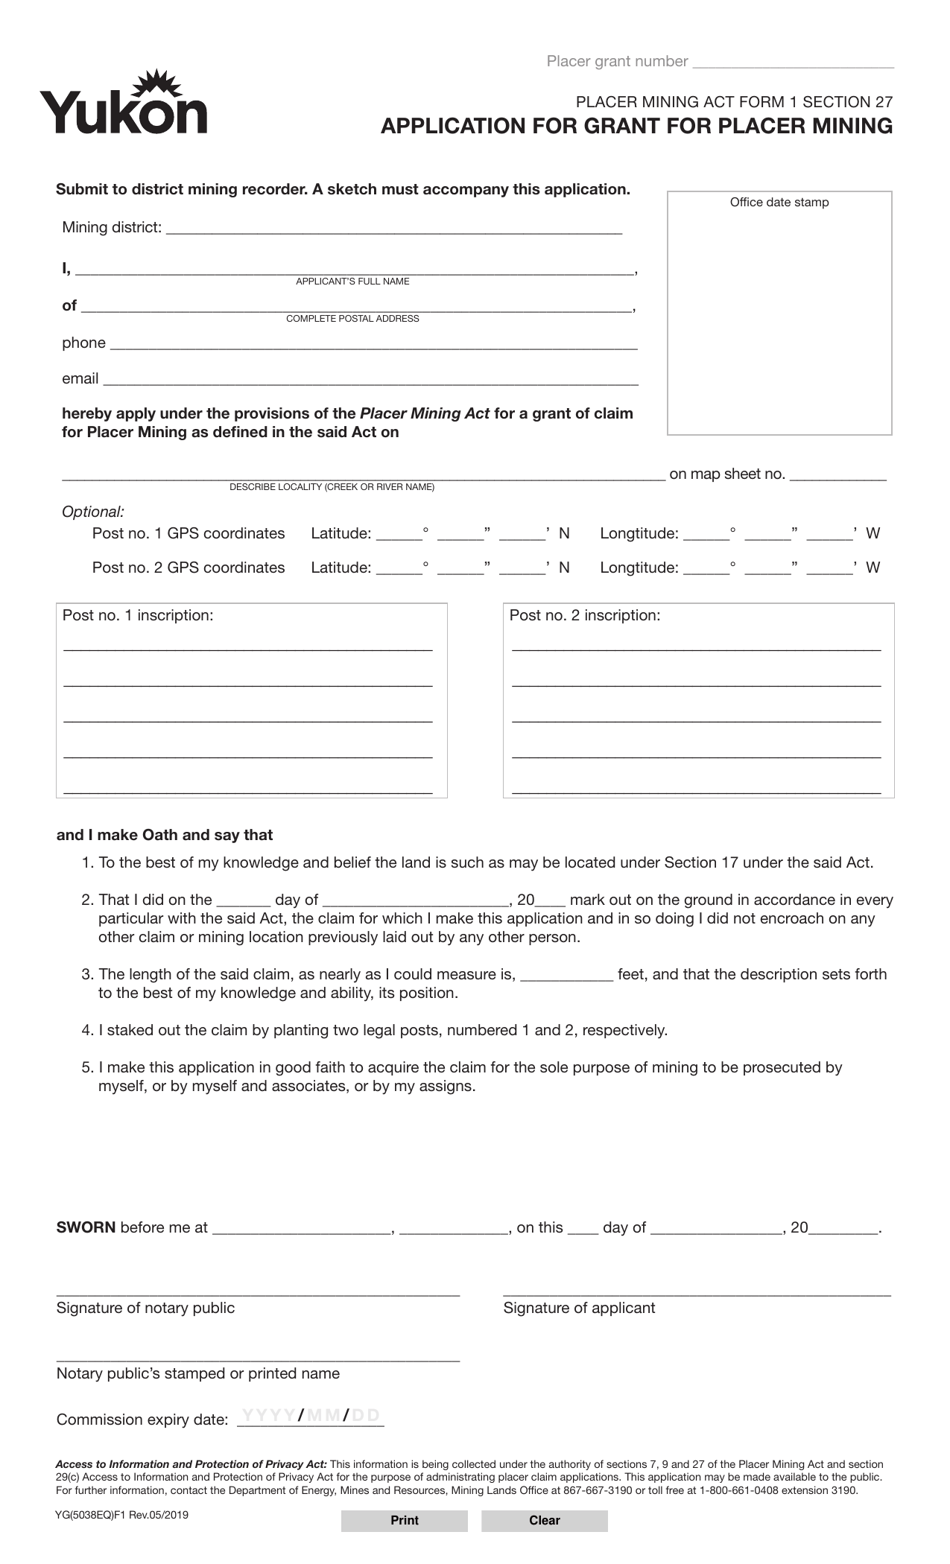 Form 1 (YG5038) Application for Grant for Placer Mining - Yukon, Canada, Page 1